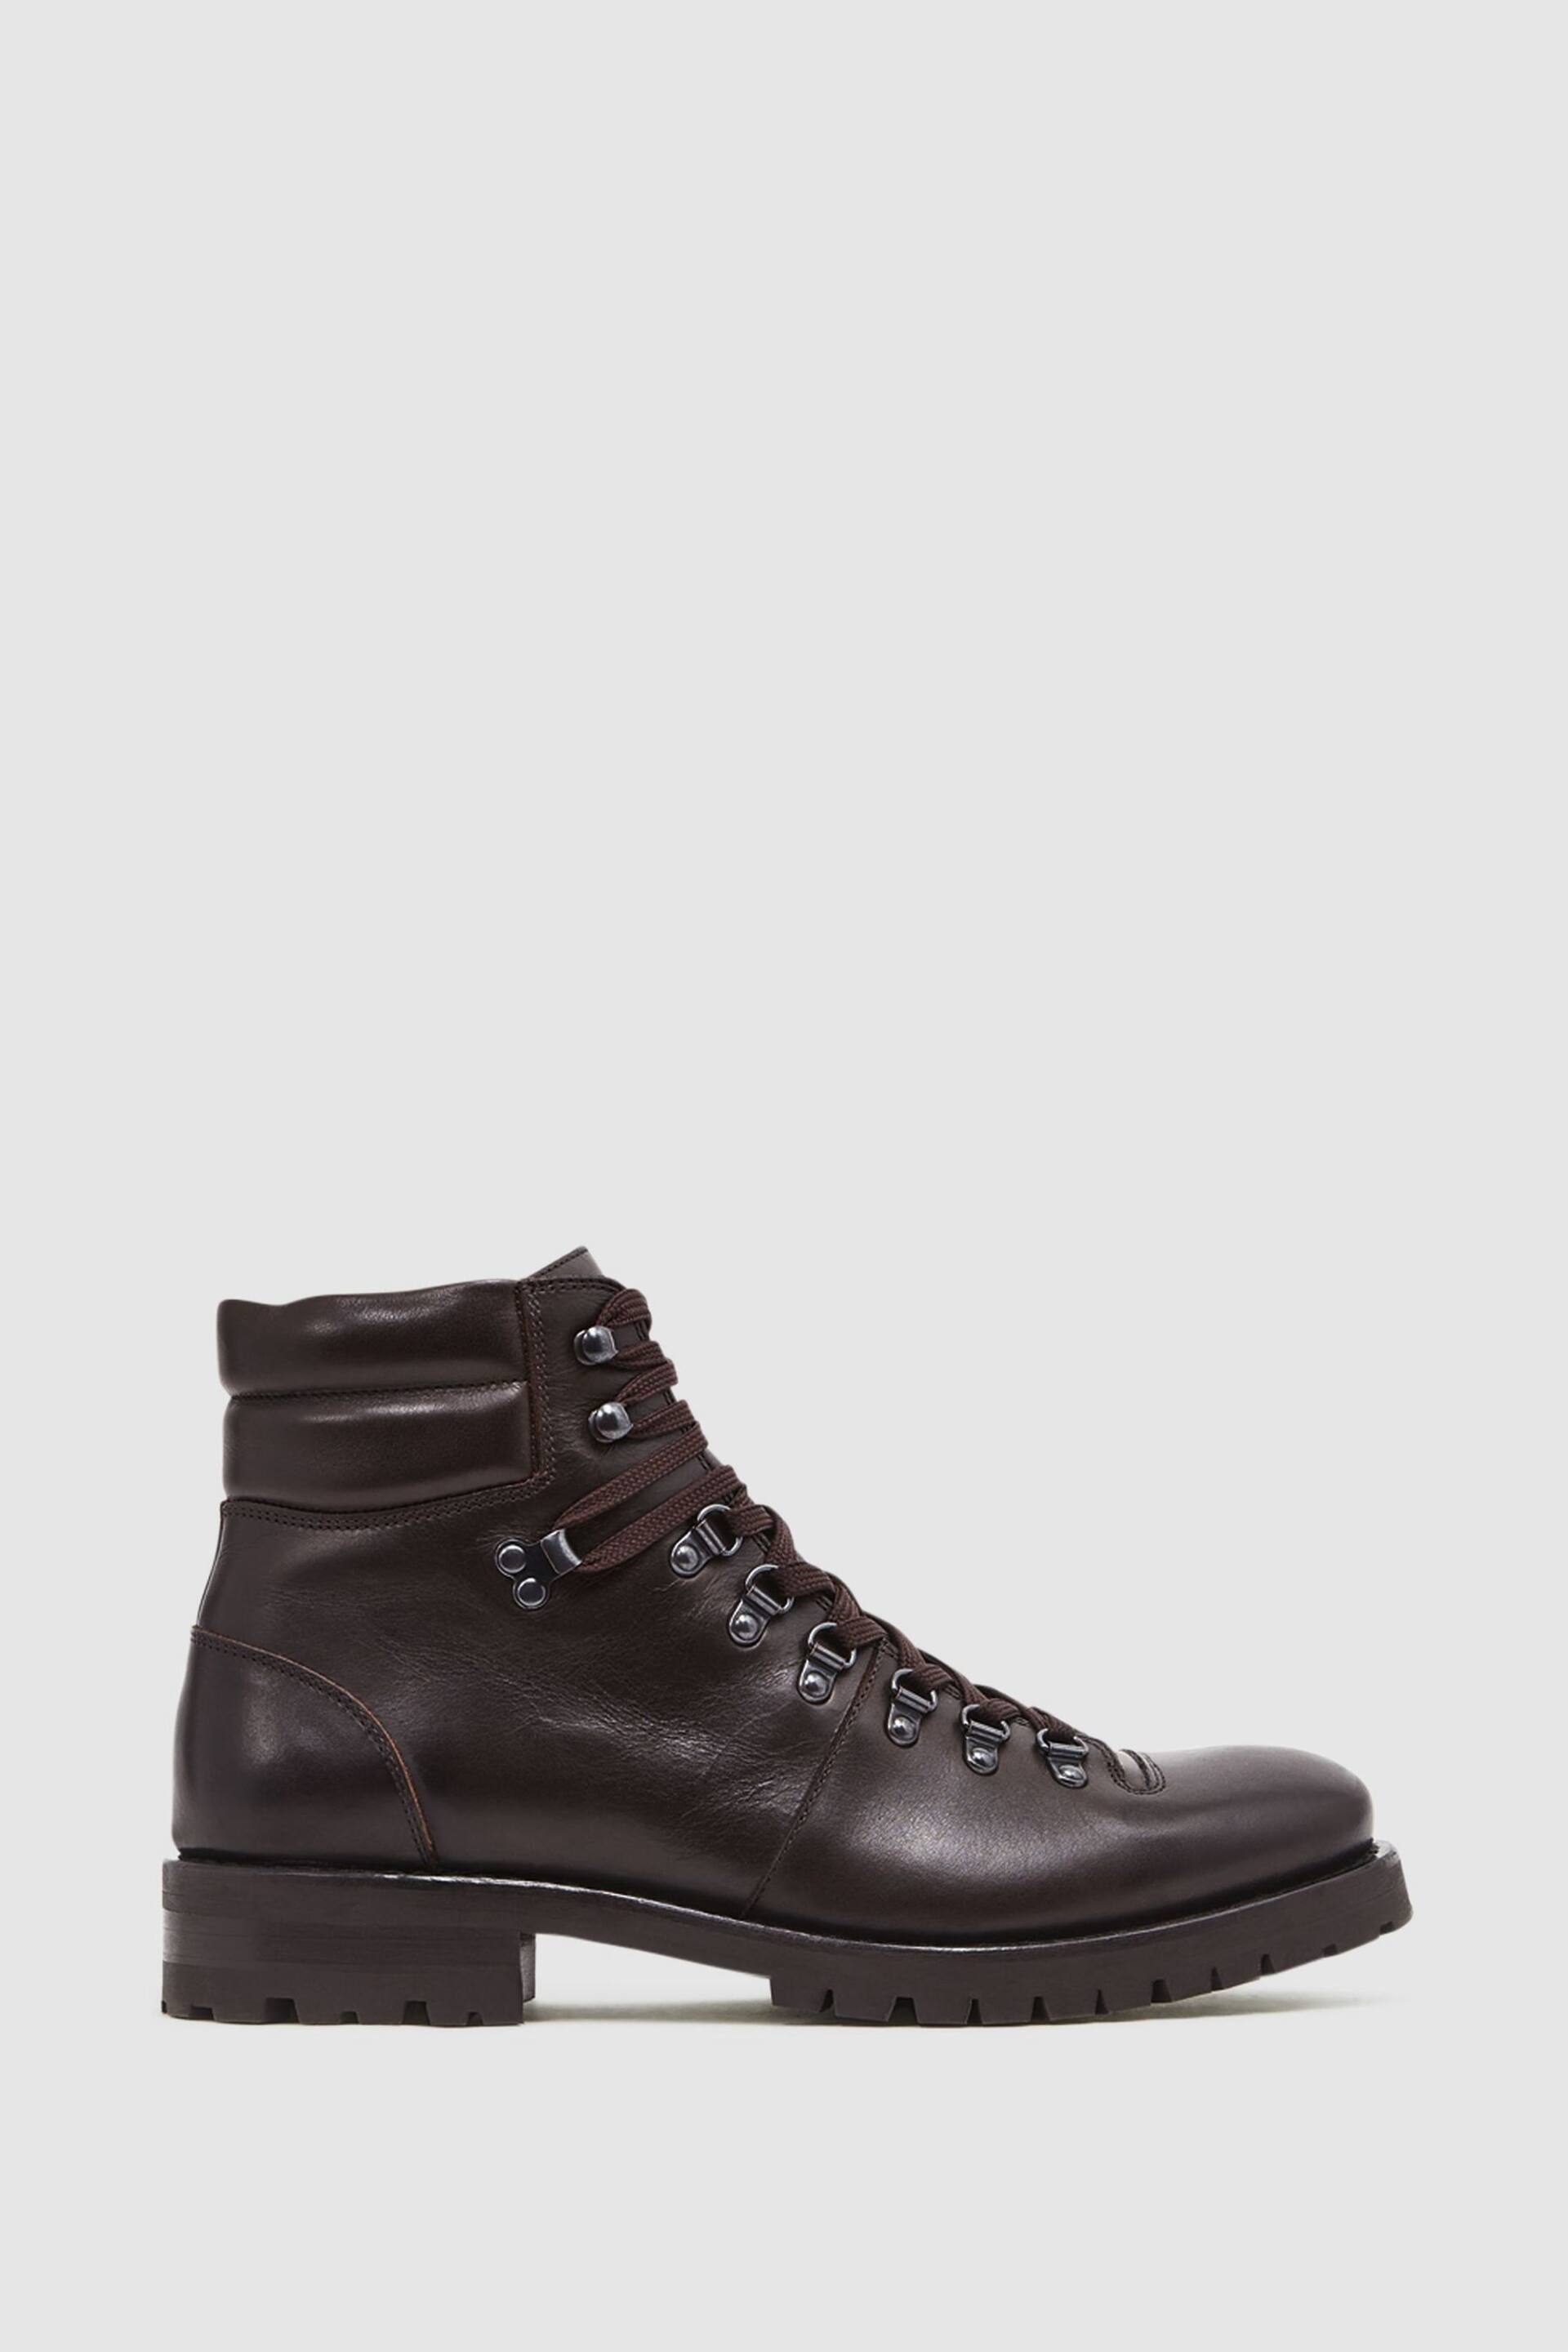 Reiss Dark Brown Amwell Leather Hiking Boots - Image 1 of 8